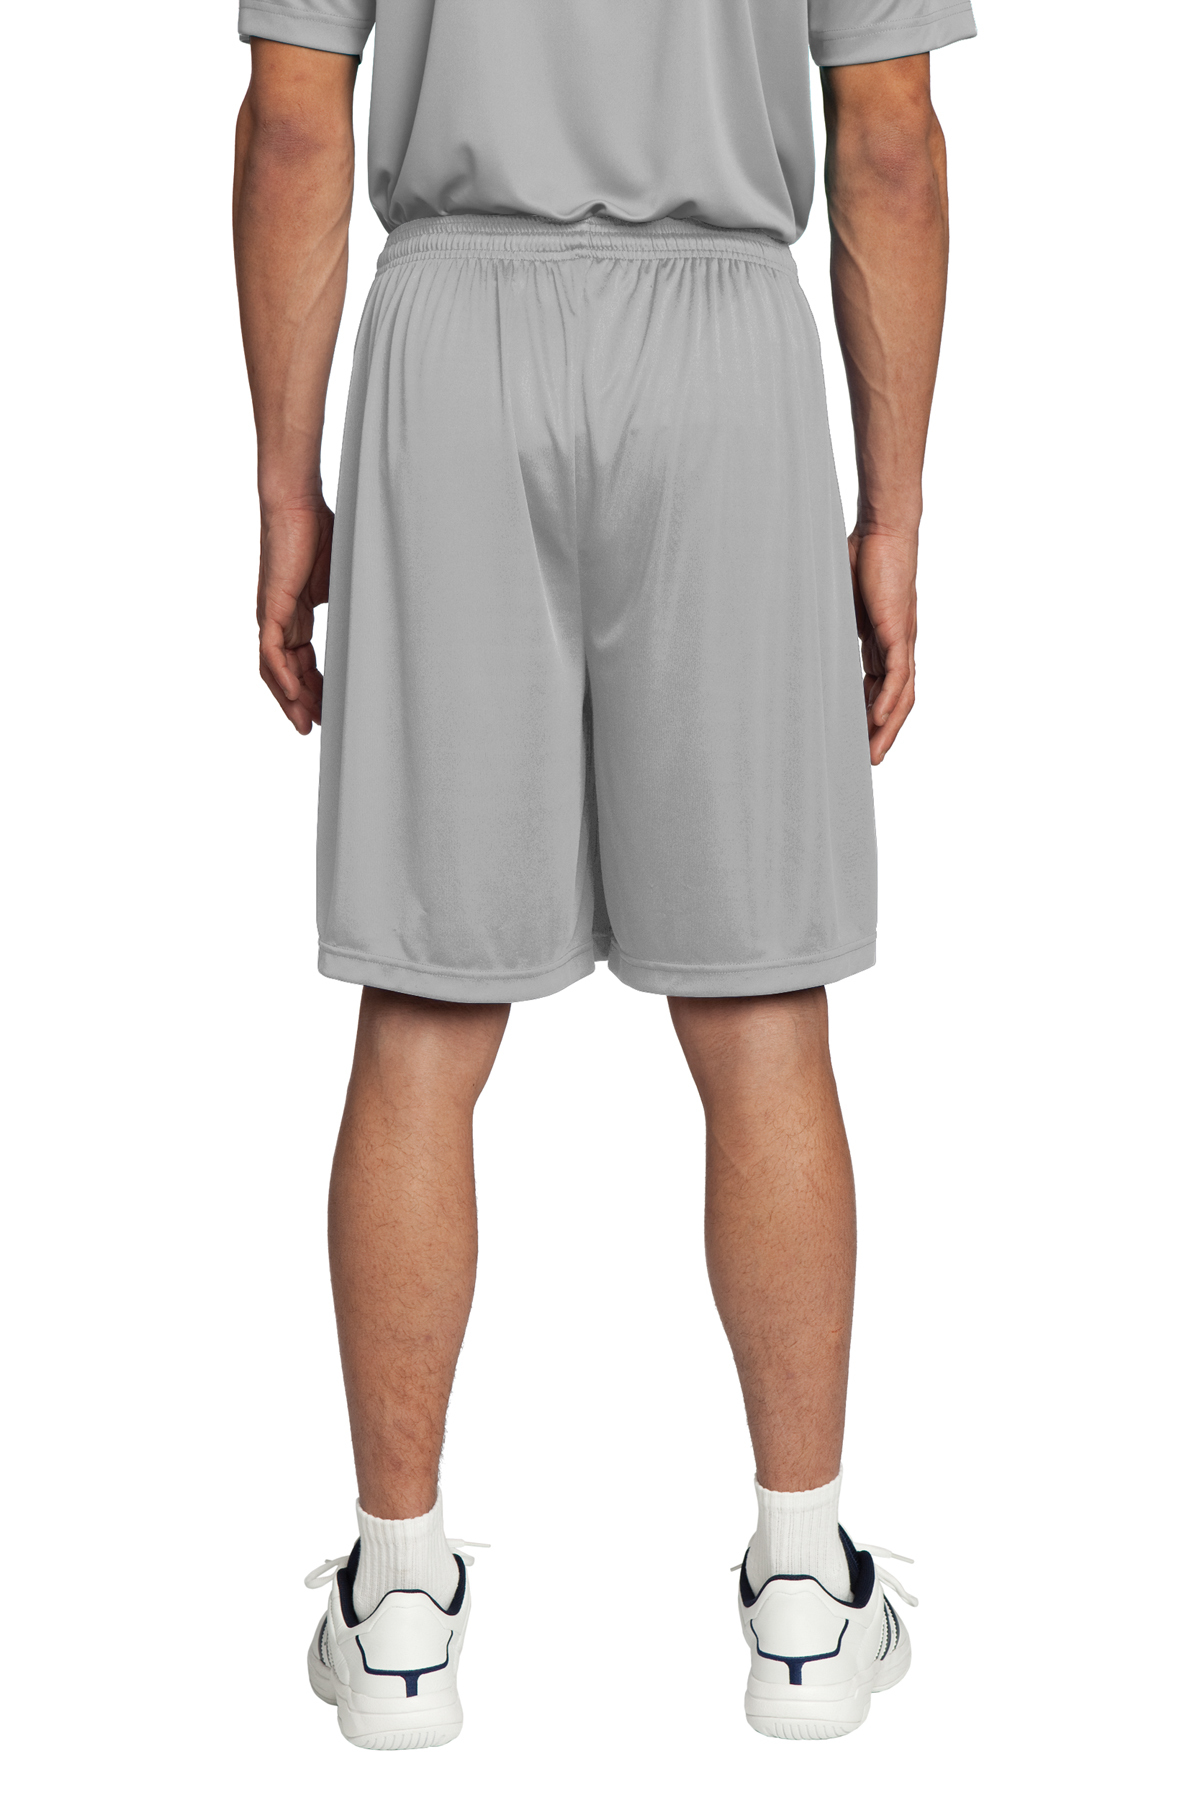 Sport-Tek PosiCharge Competitor™ Short | Product | Company Casuals